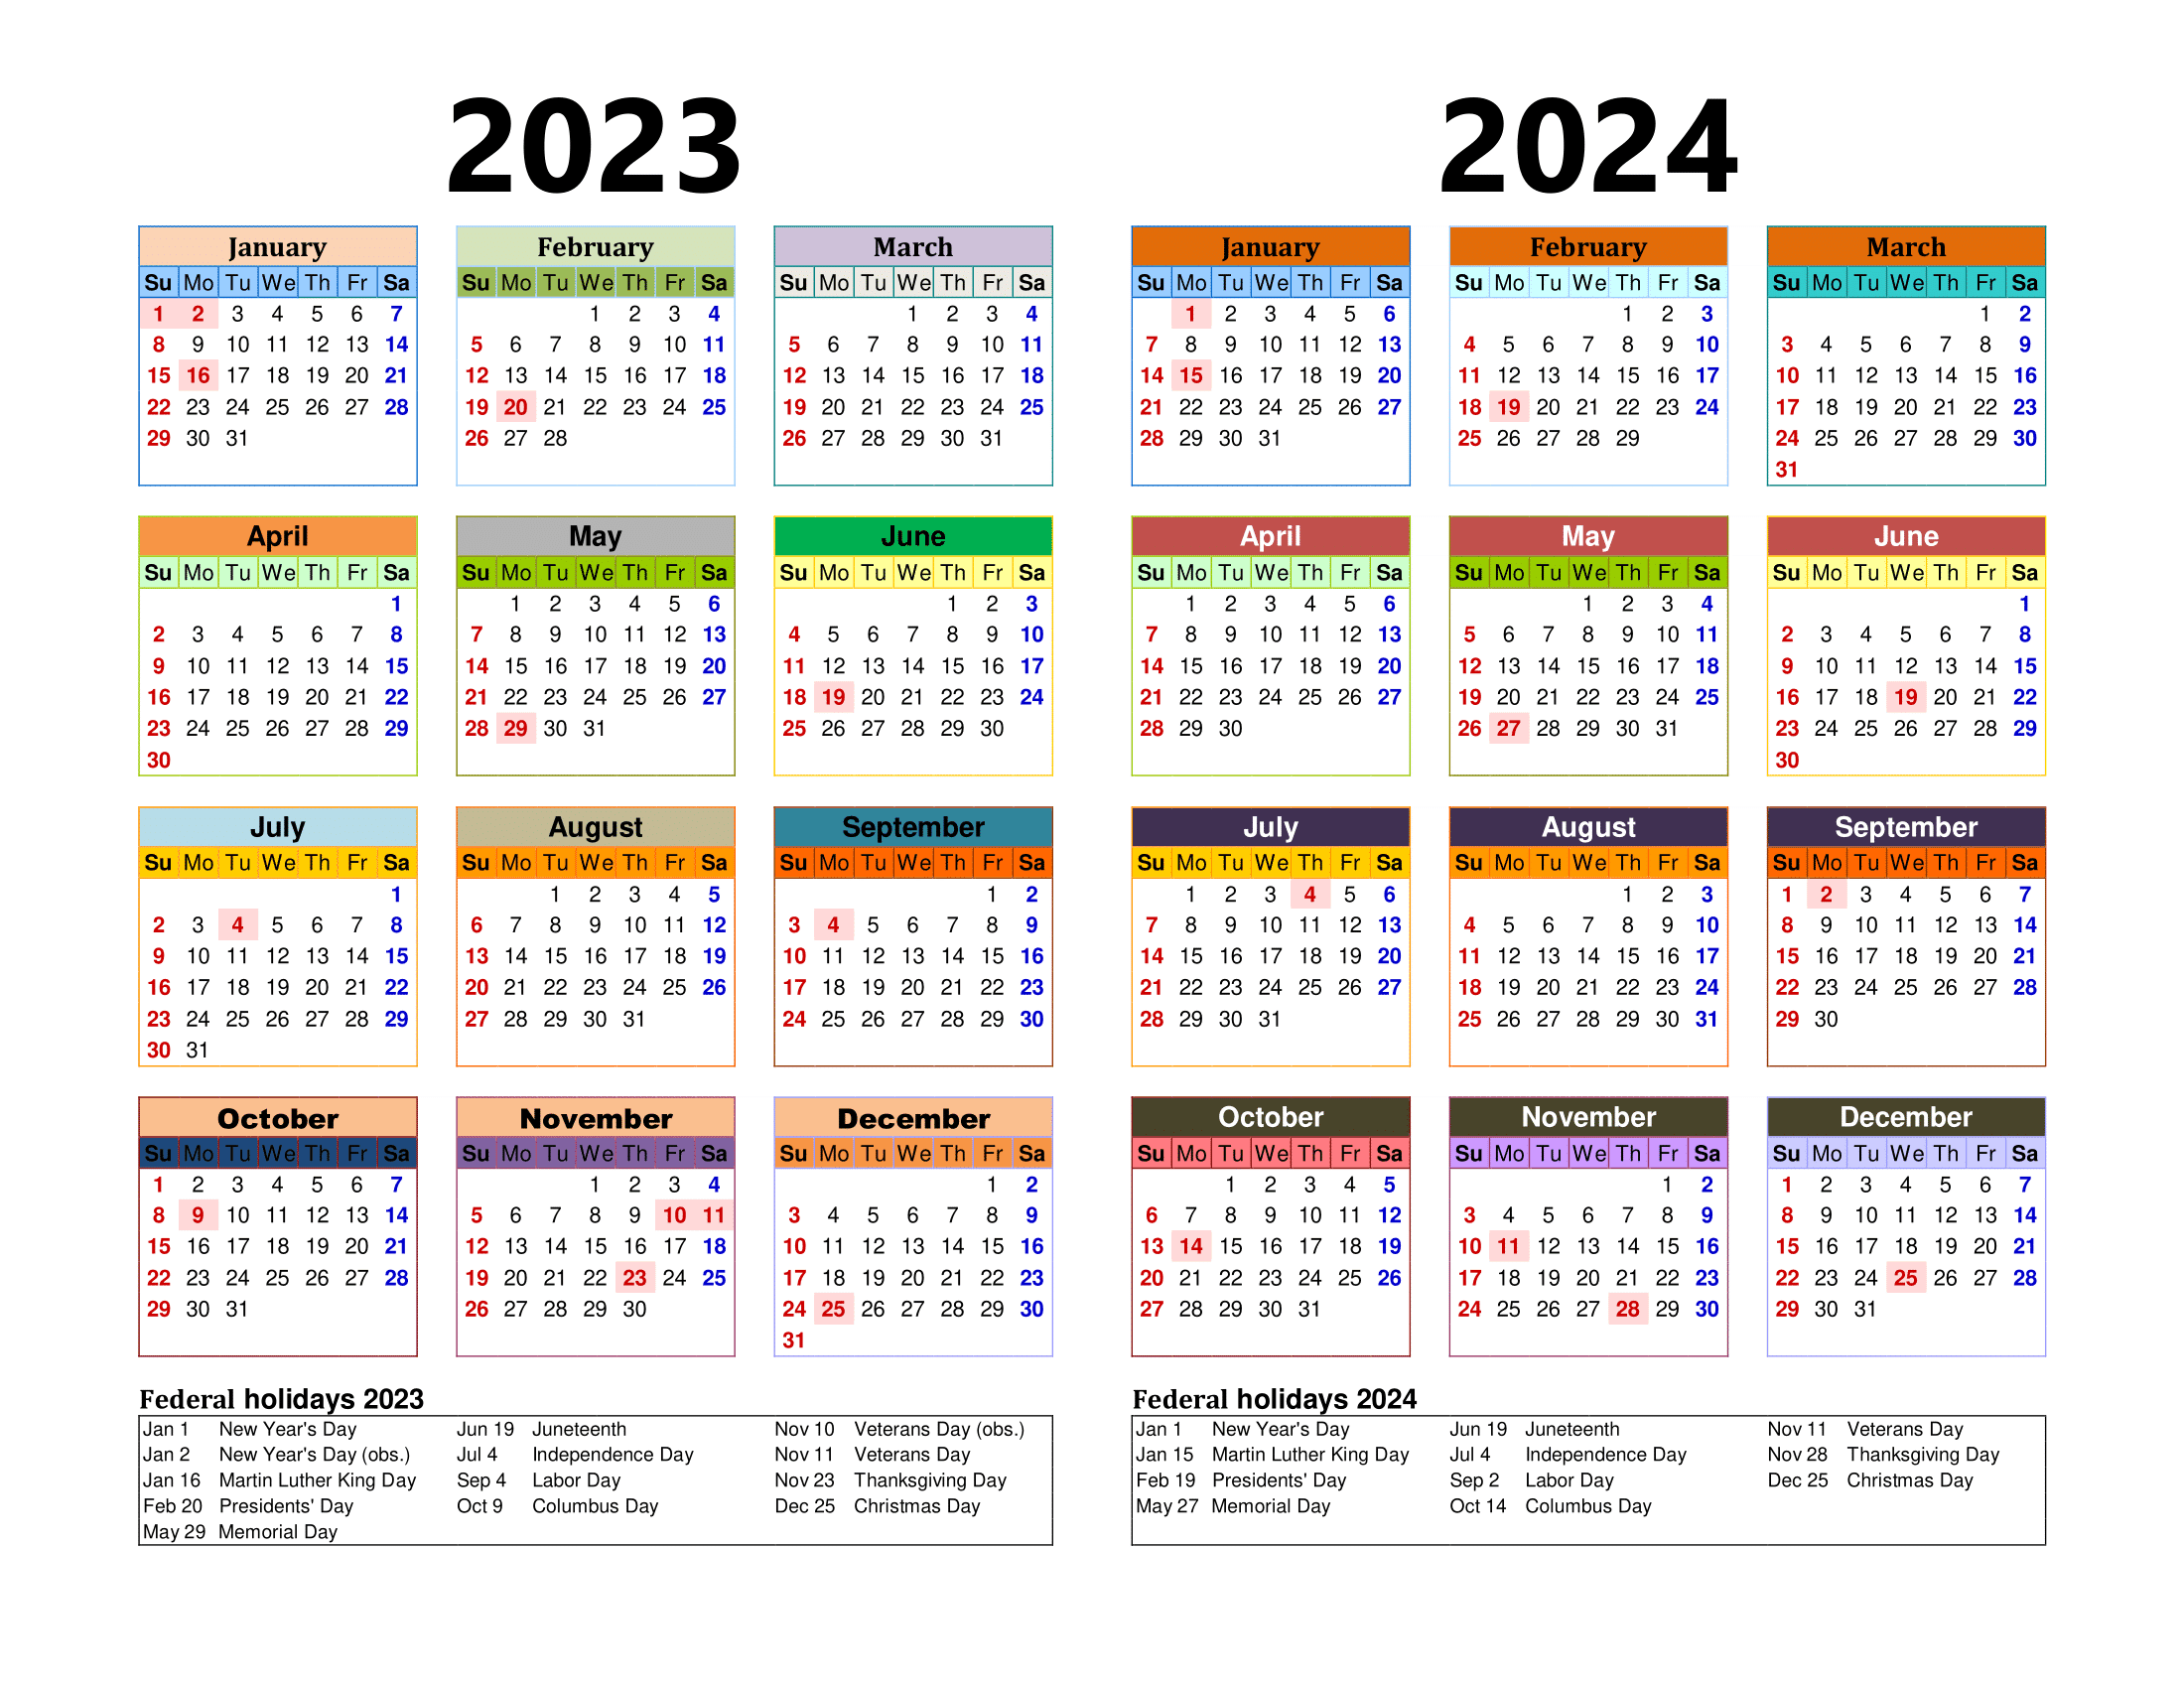 Free Printable Two Year Calendar Templates For 2023 And 2024 In Pdf for 2023-2024 Calendar With Holidays Printable